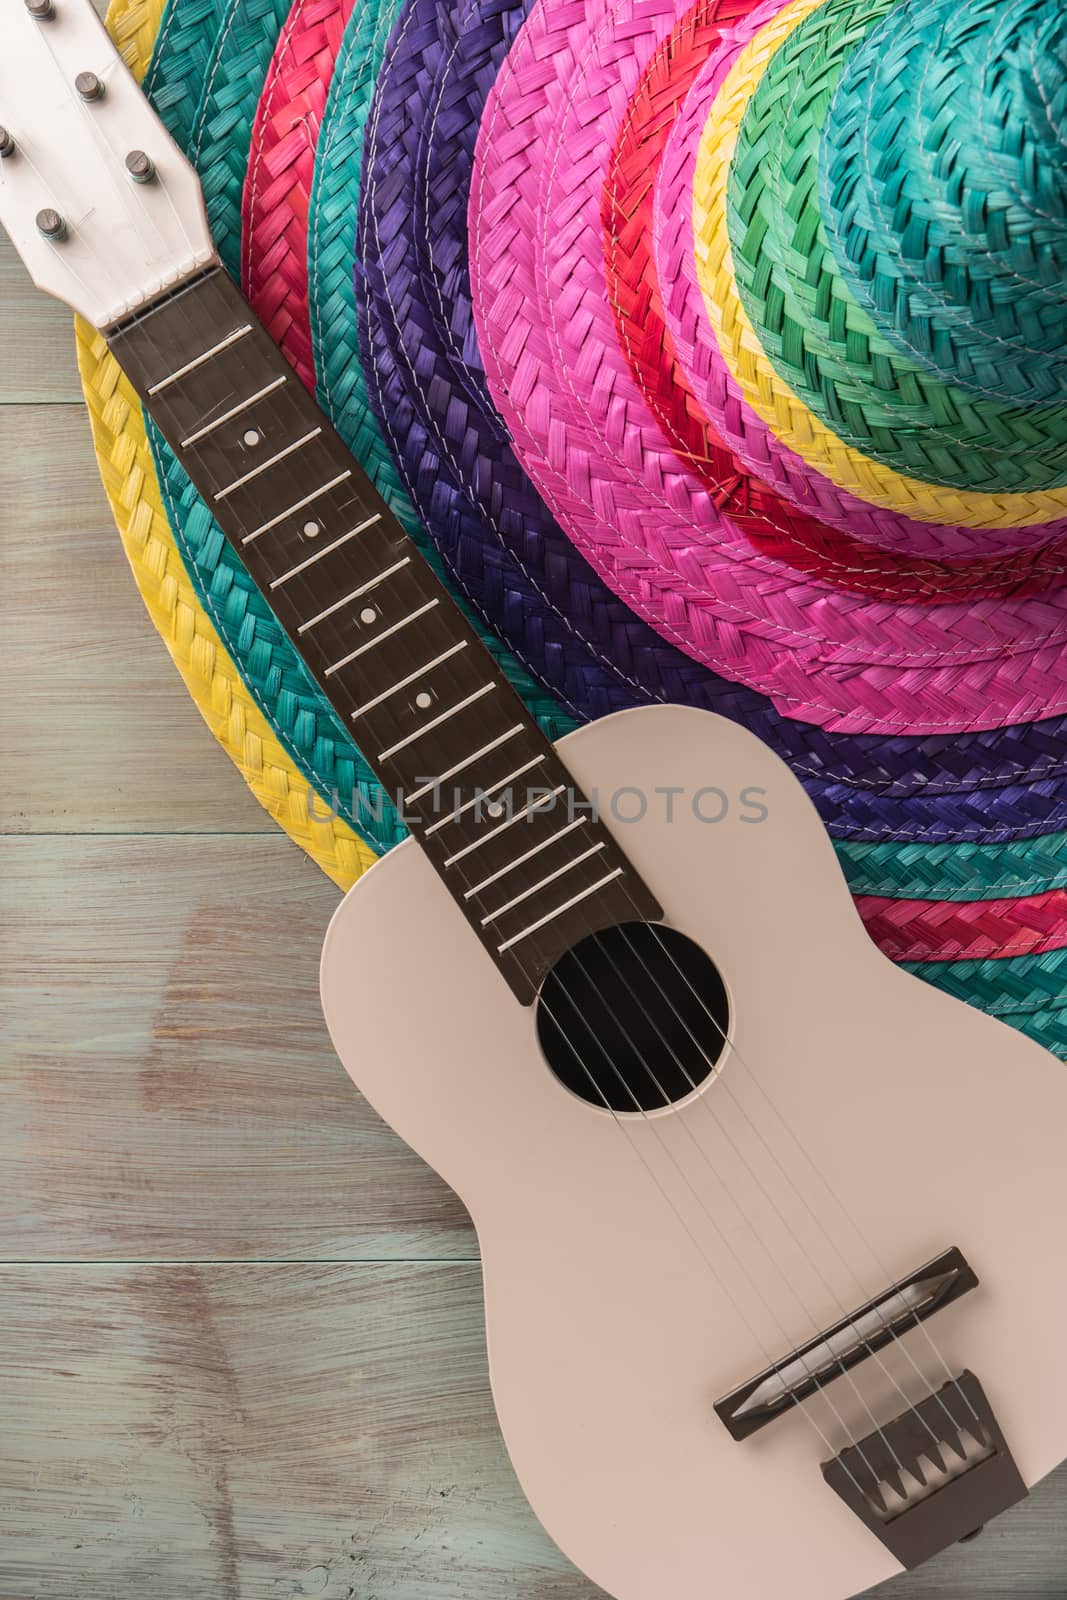 Mexican background with sombrero and guitar by AnaMarques